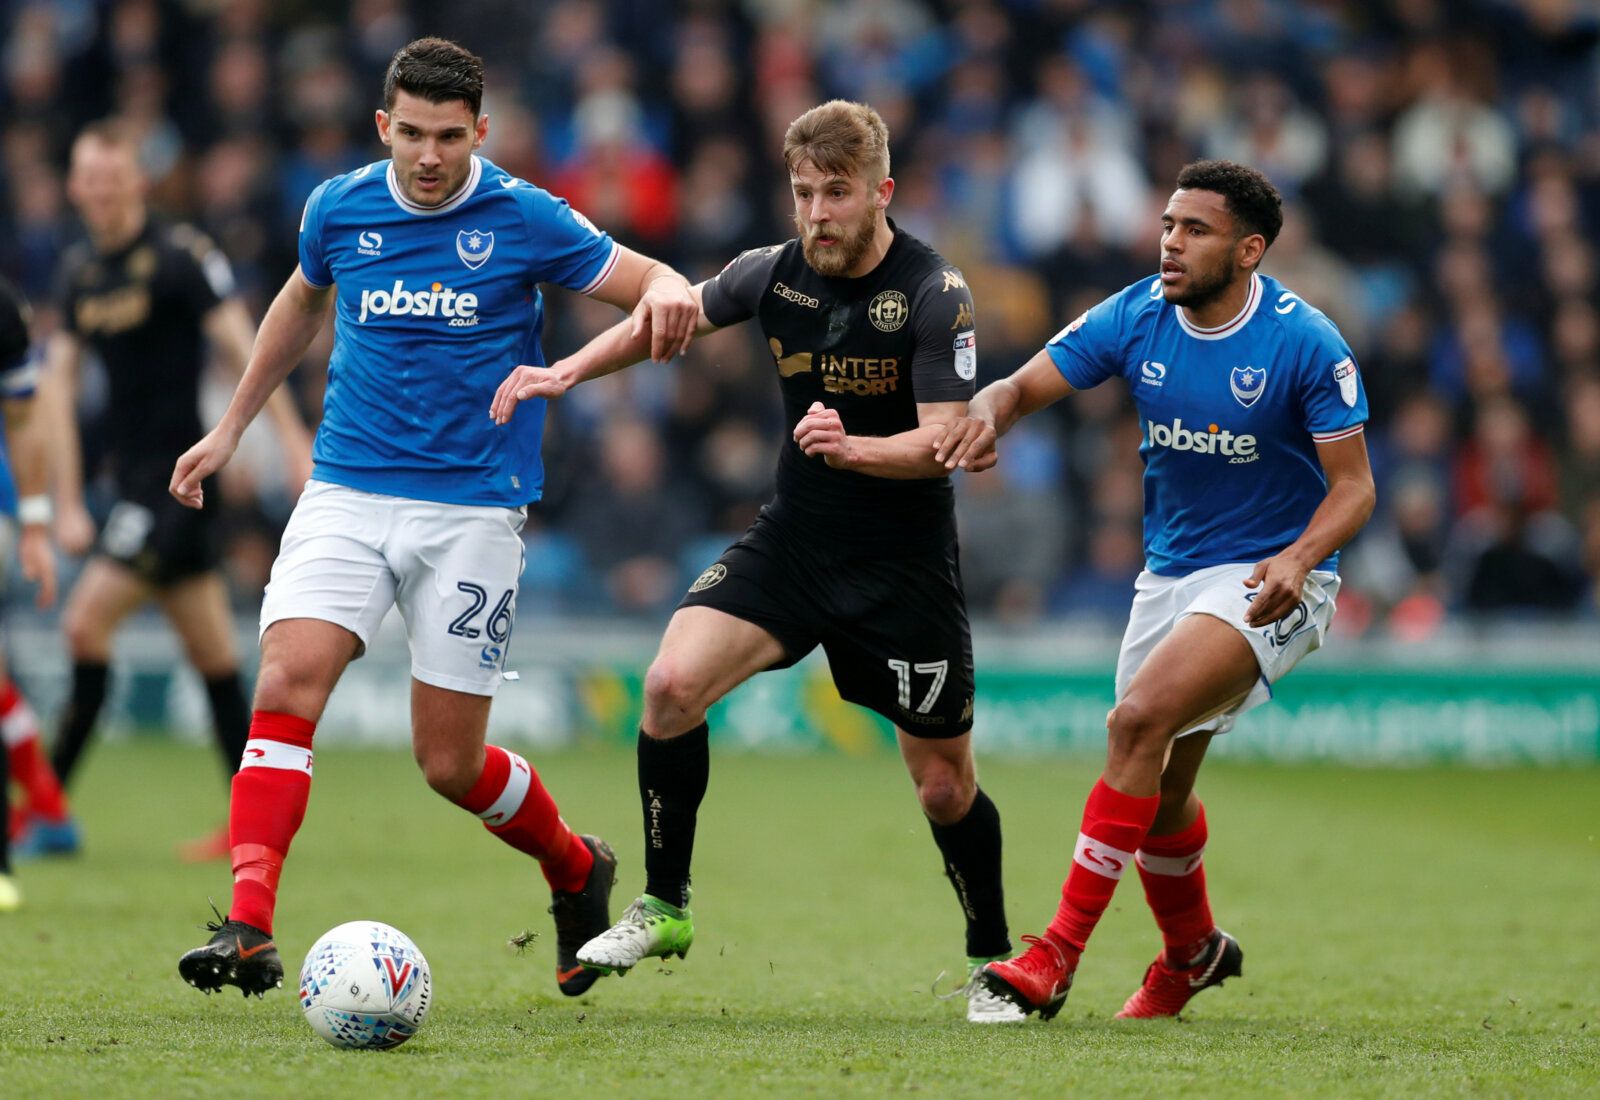 Soccer Football - League One - Portsmouth vs Wigan Athletic - Fratton Park, Portsmouth, Britain - April 2, 2018   Portsmouth’s Gareth Evans (L) and Nathan Thompson (R) in action with Wigan’s Michael Jacobs   Action Images/Matthew Childs    EDITORIAL USE ONLY. No use with unauthorized audio, video, data, fixture lists, club/league logos or 